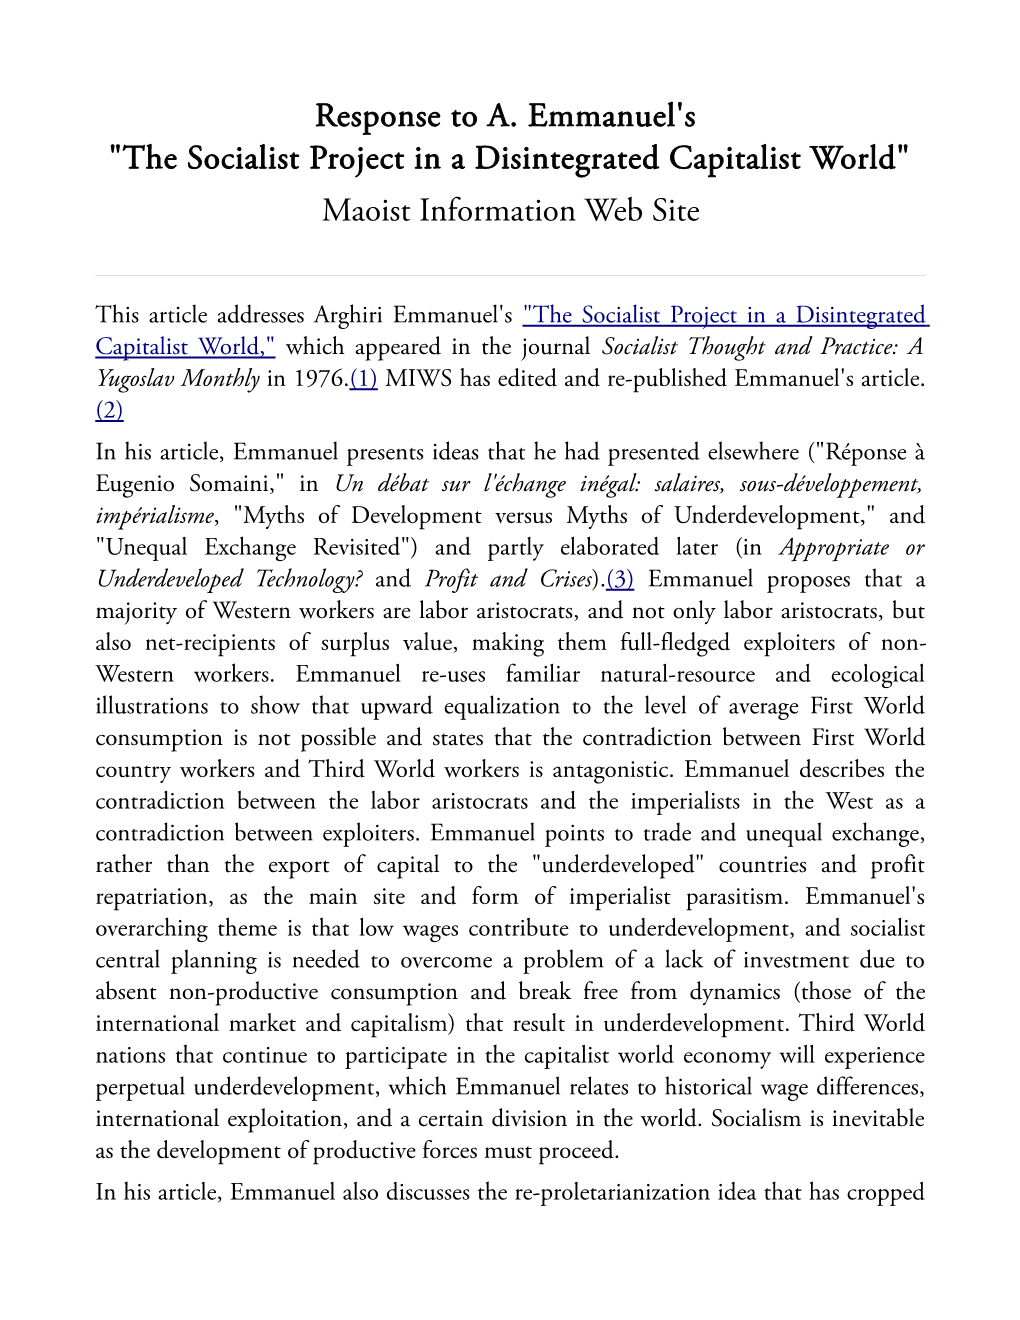 Response to A. Emmanuel's "The Socialist Project in a Disintegrated Capitalist World" Maoist Information Web Site